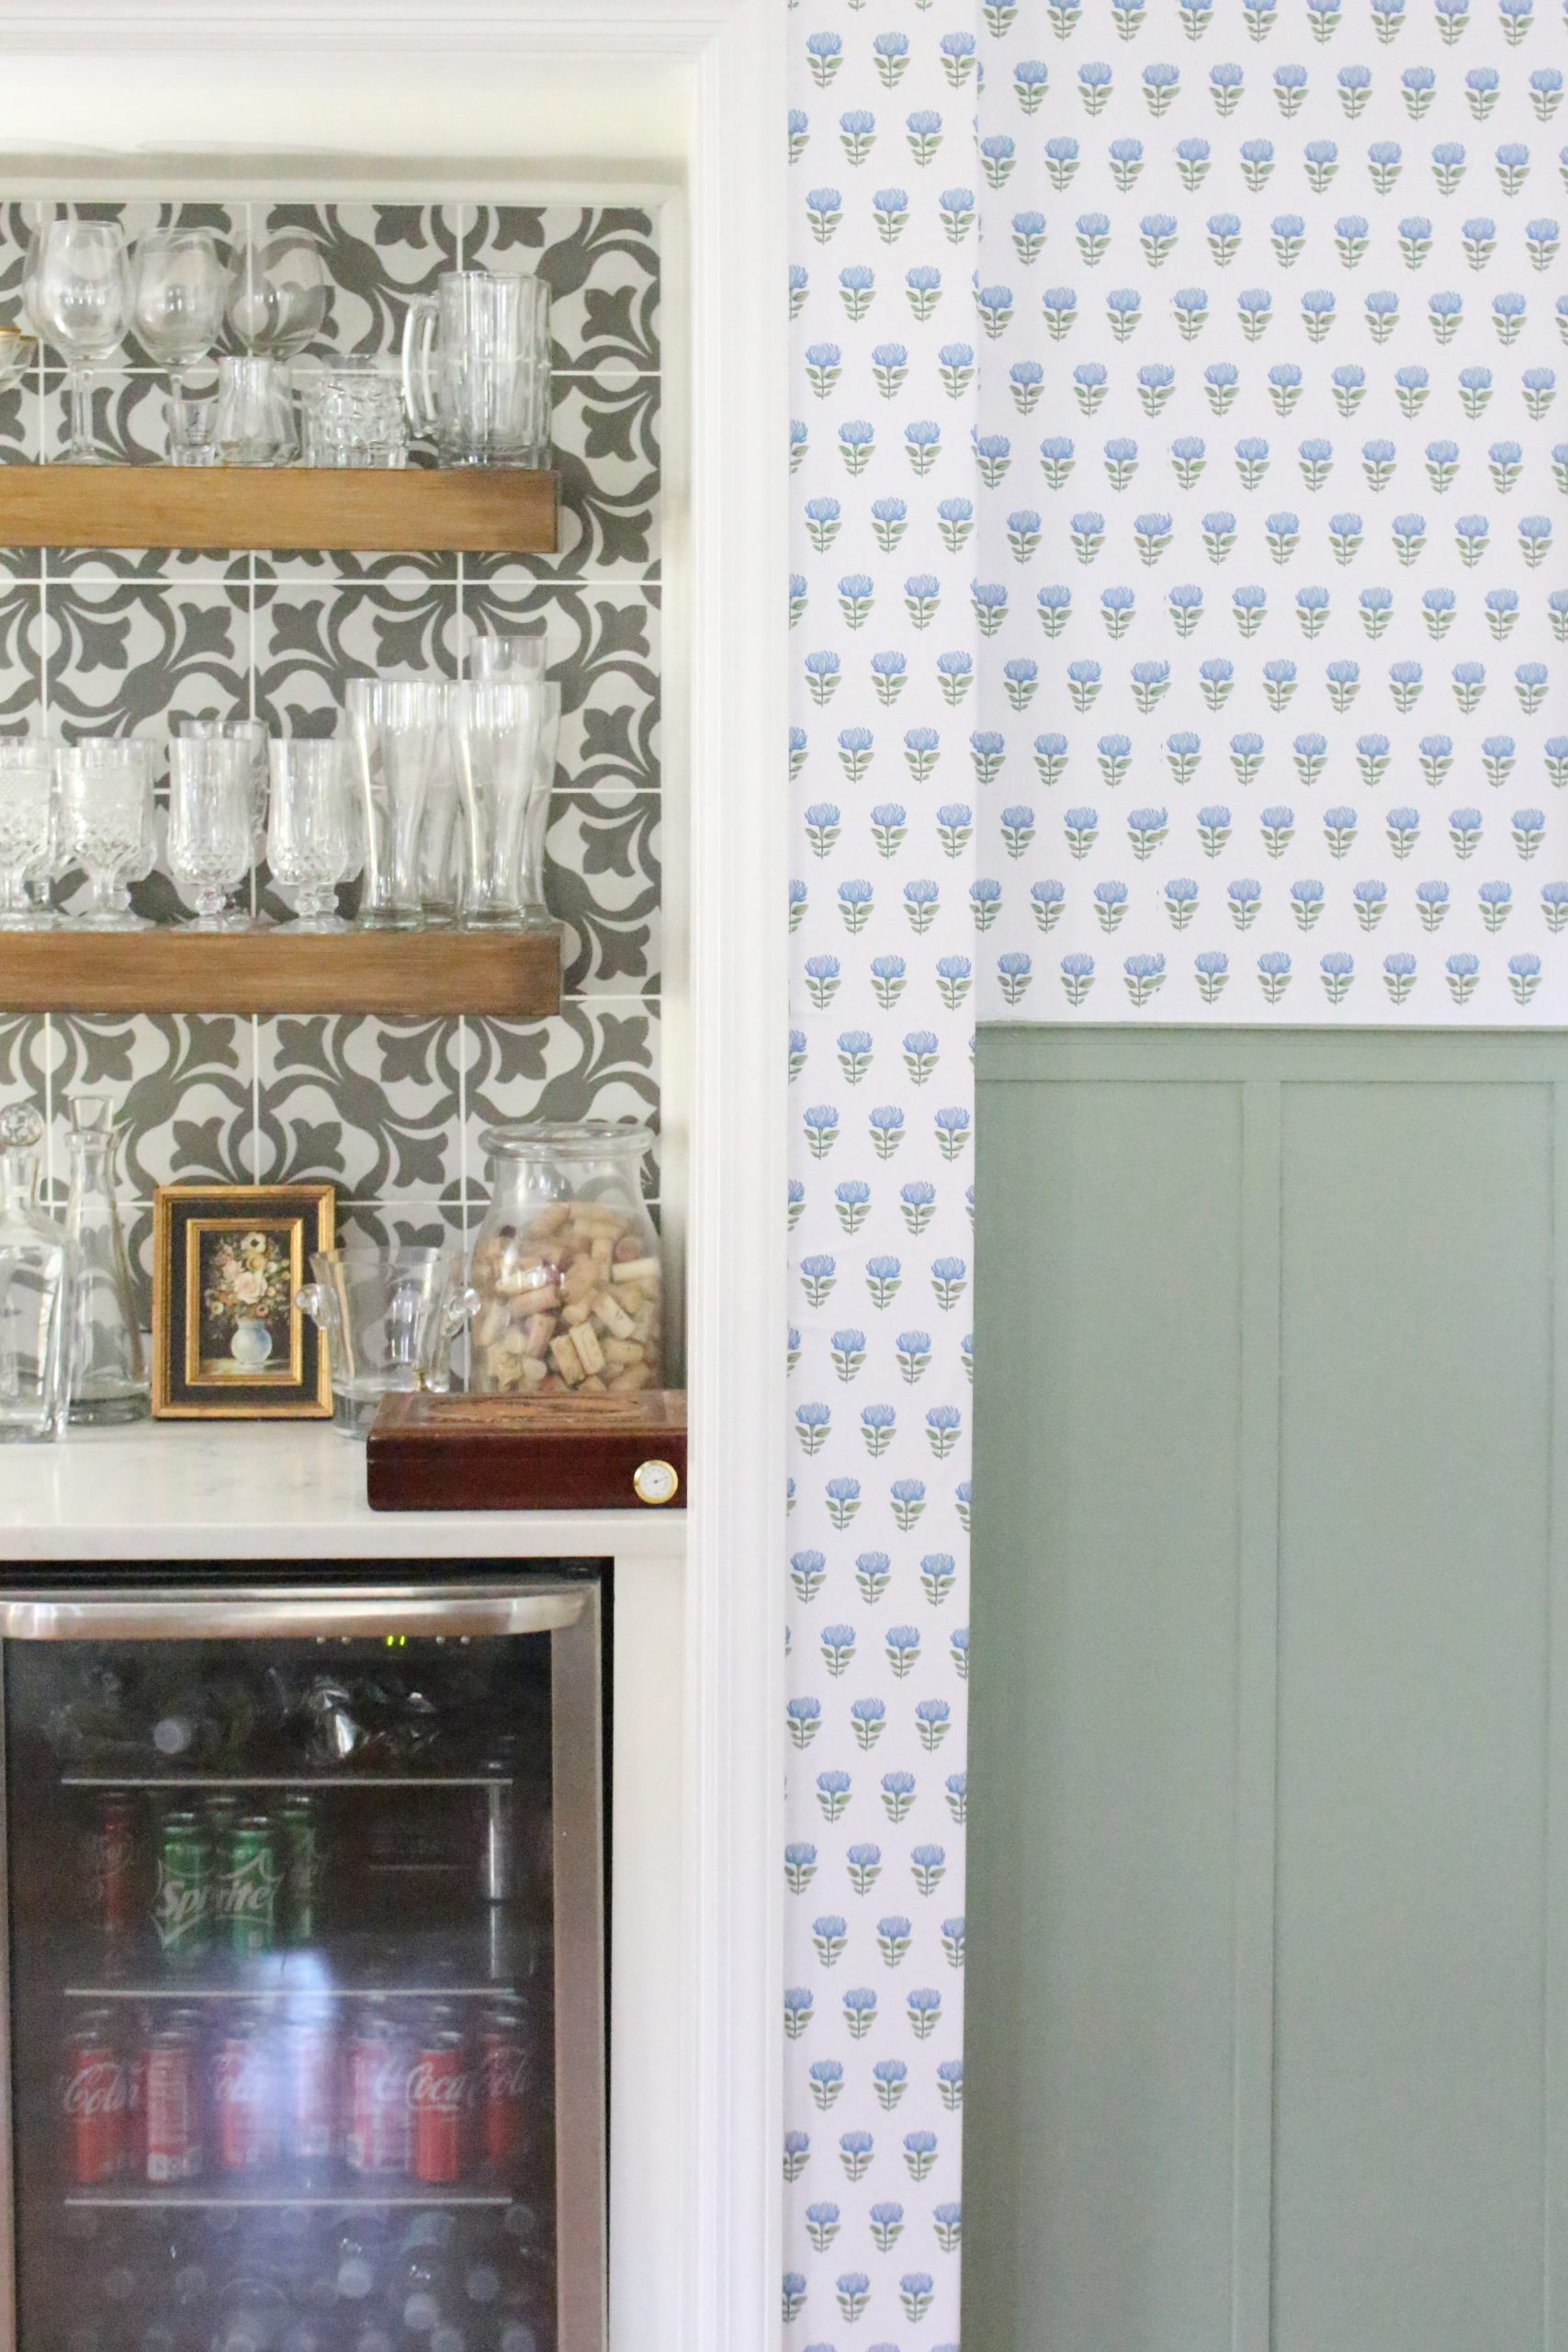 New Update With Removable Wallpaper in the Kitchen & Hallway